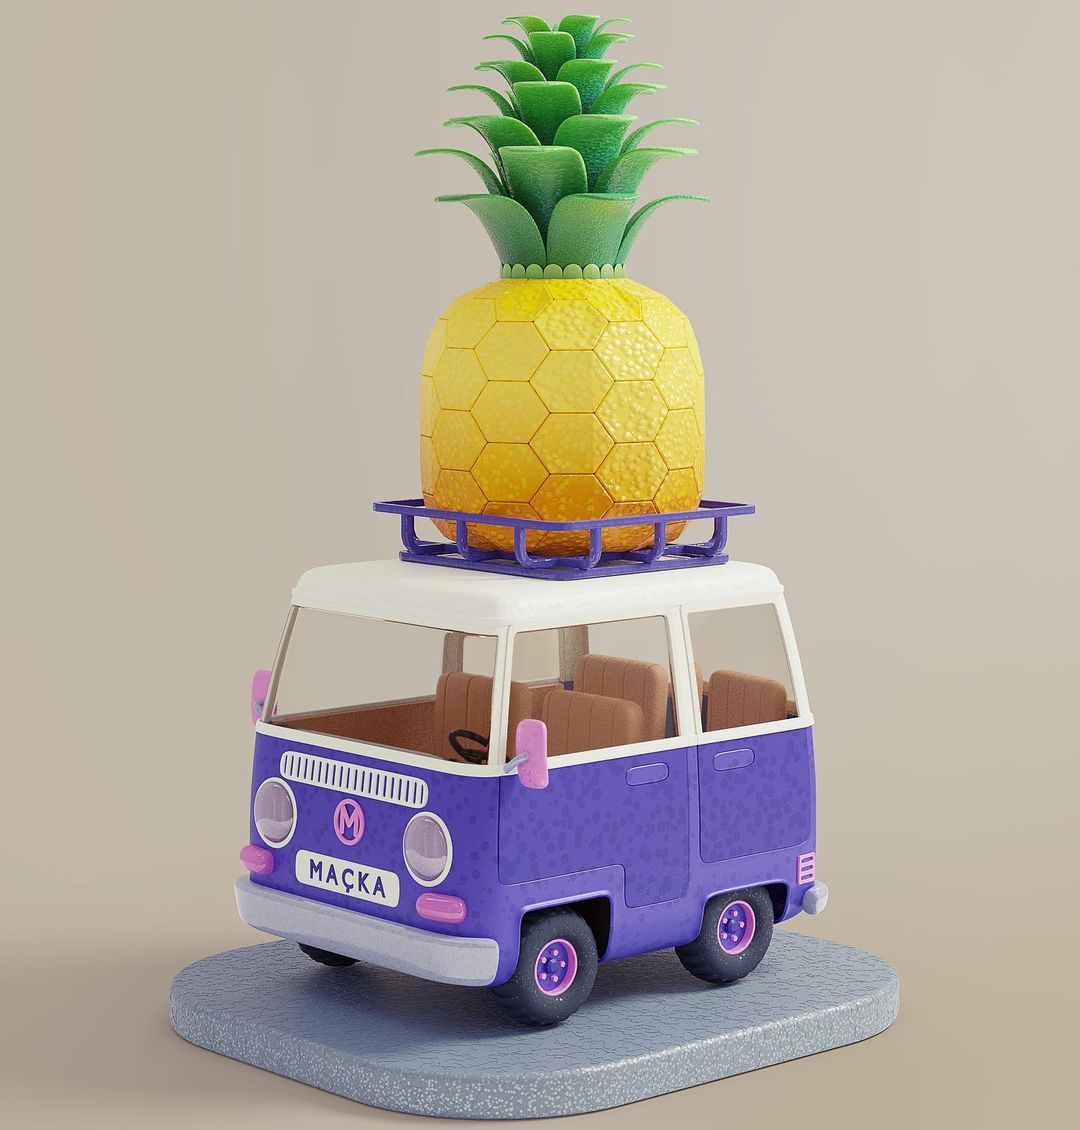 3D cute mini bus with a pineapple on top